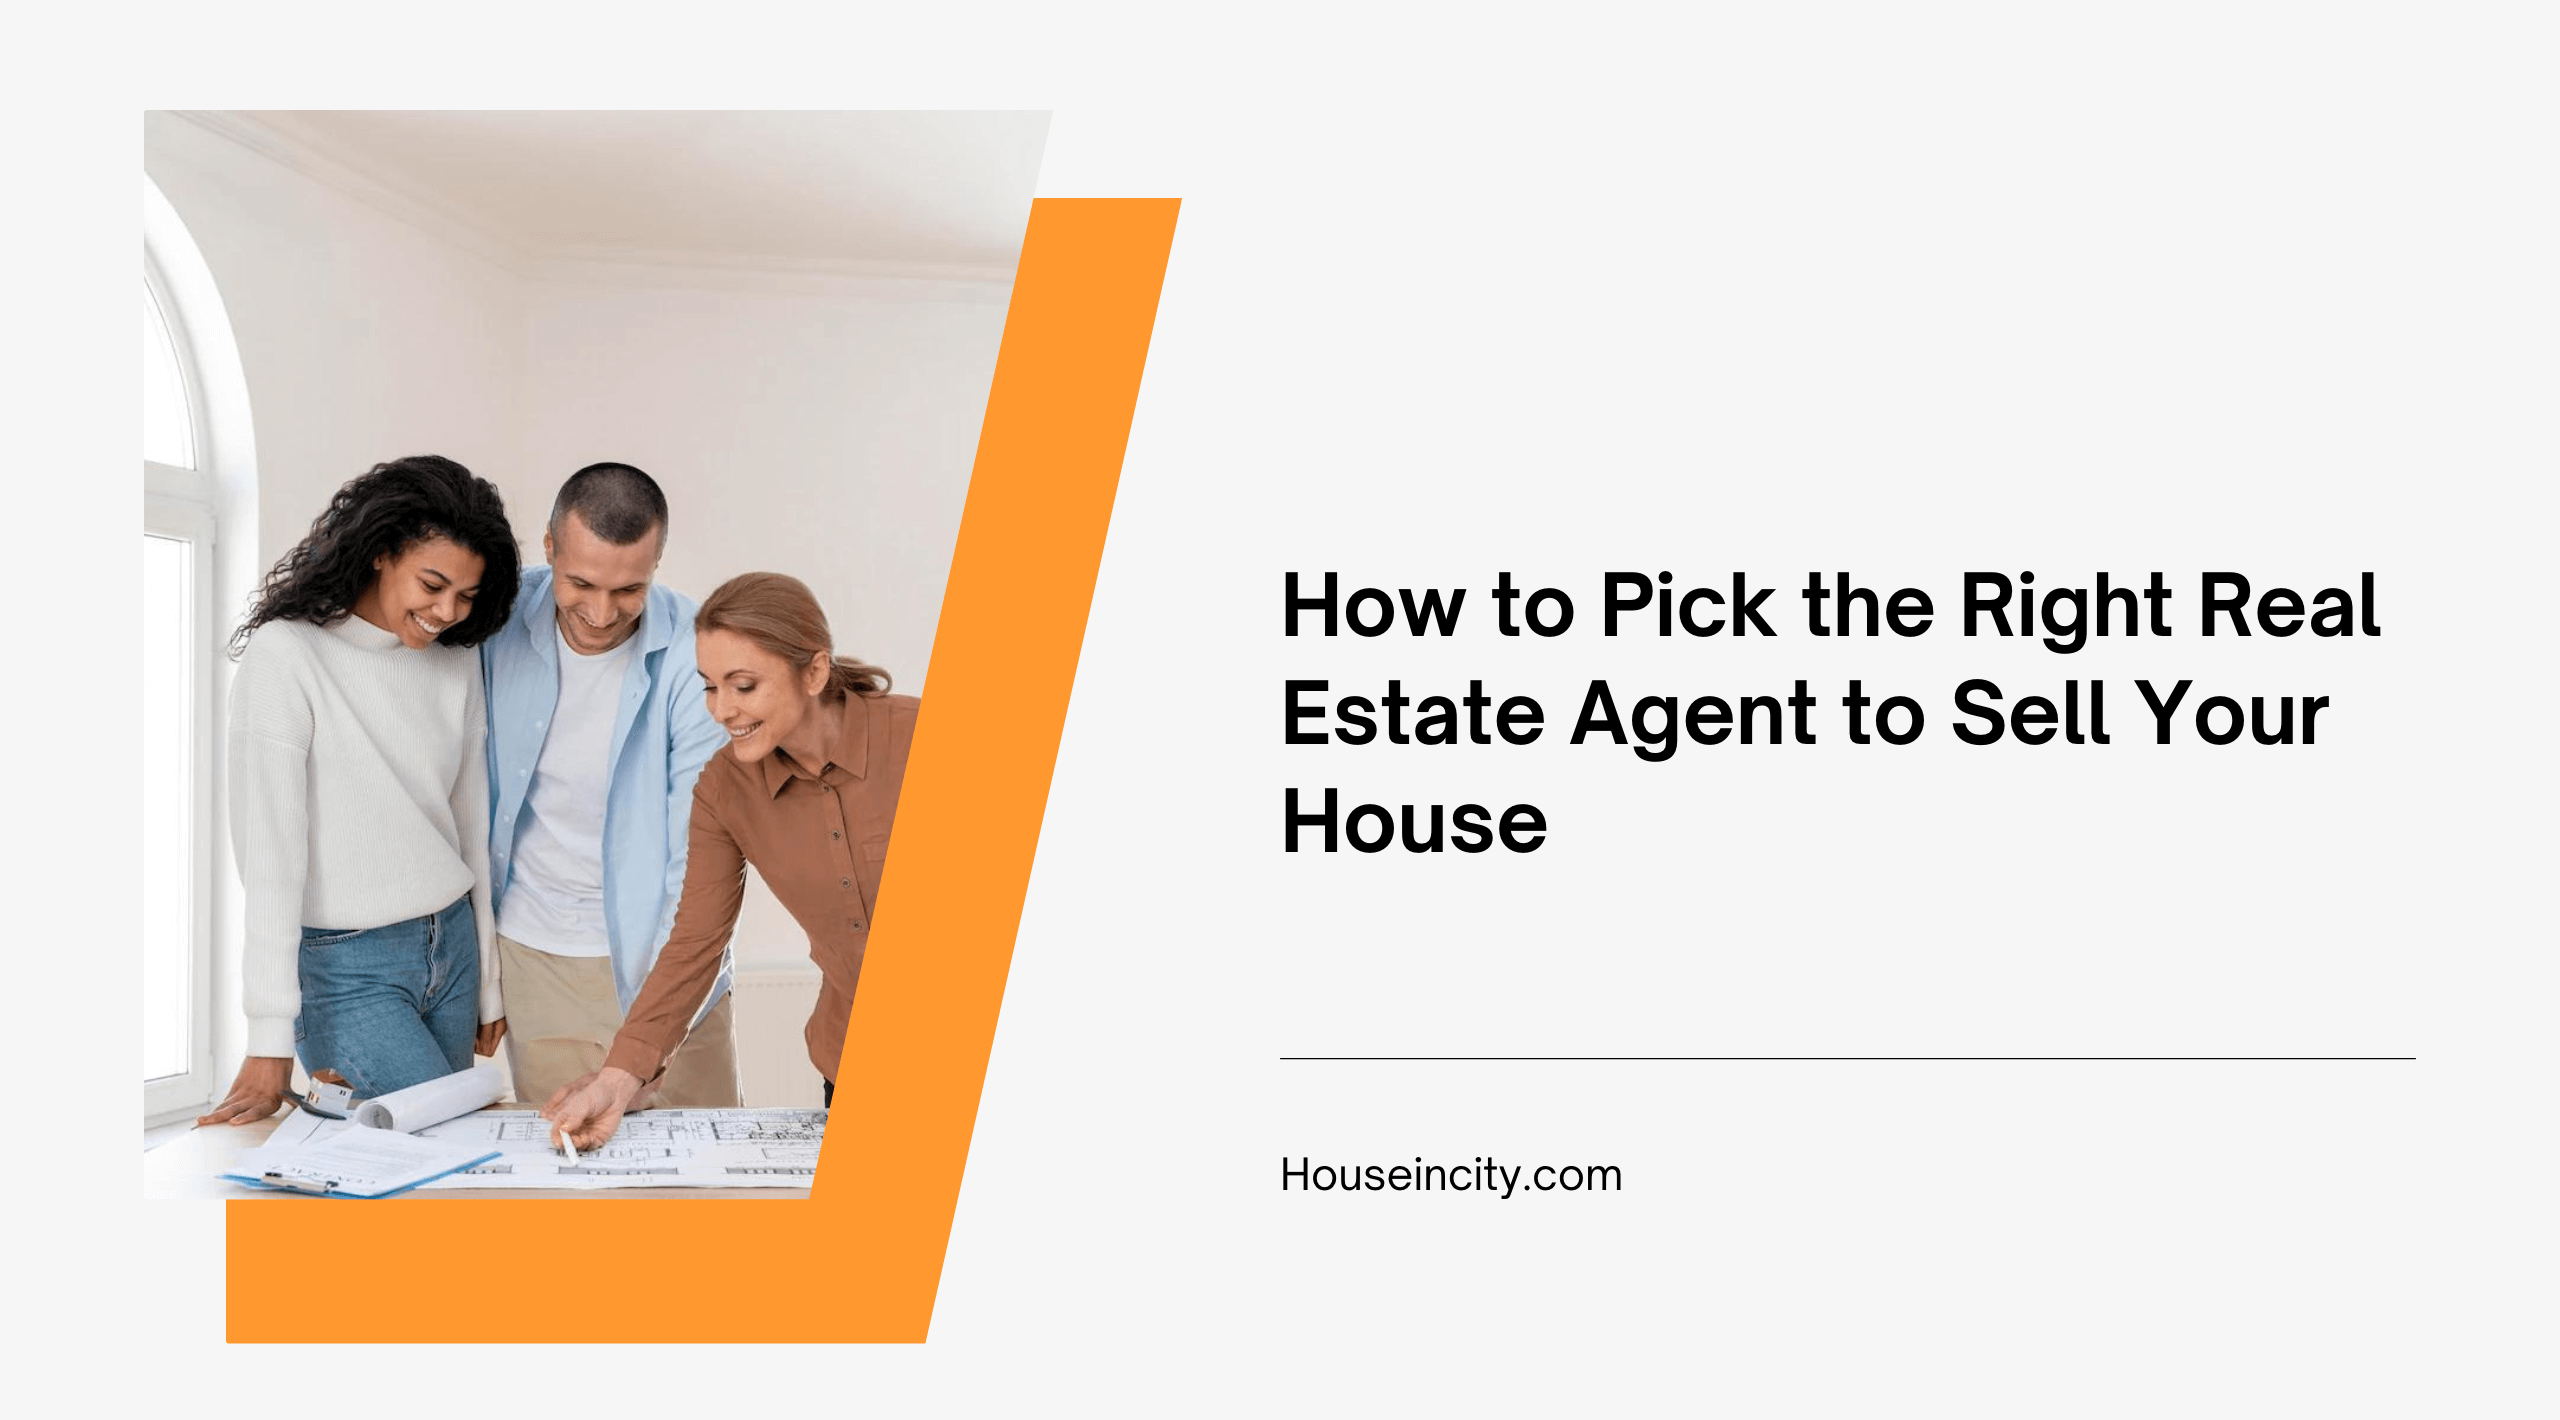 How to Pick the Right Real Estate Agent to Sell Your House